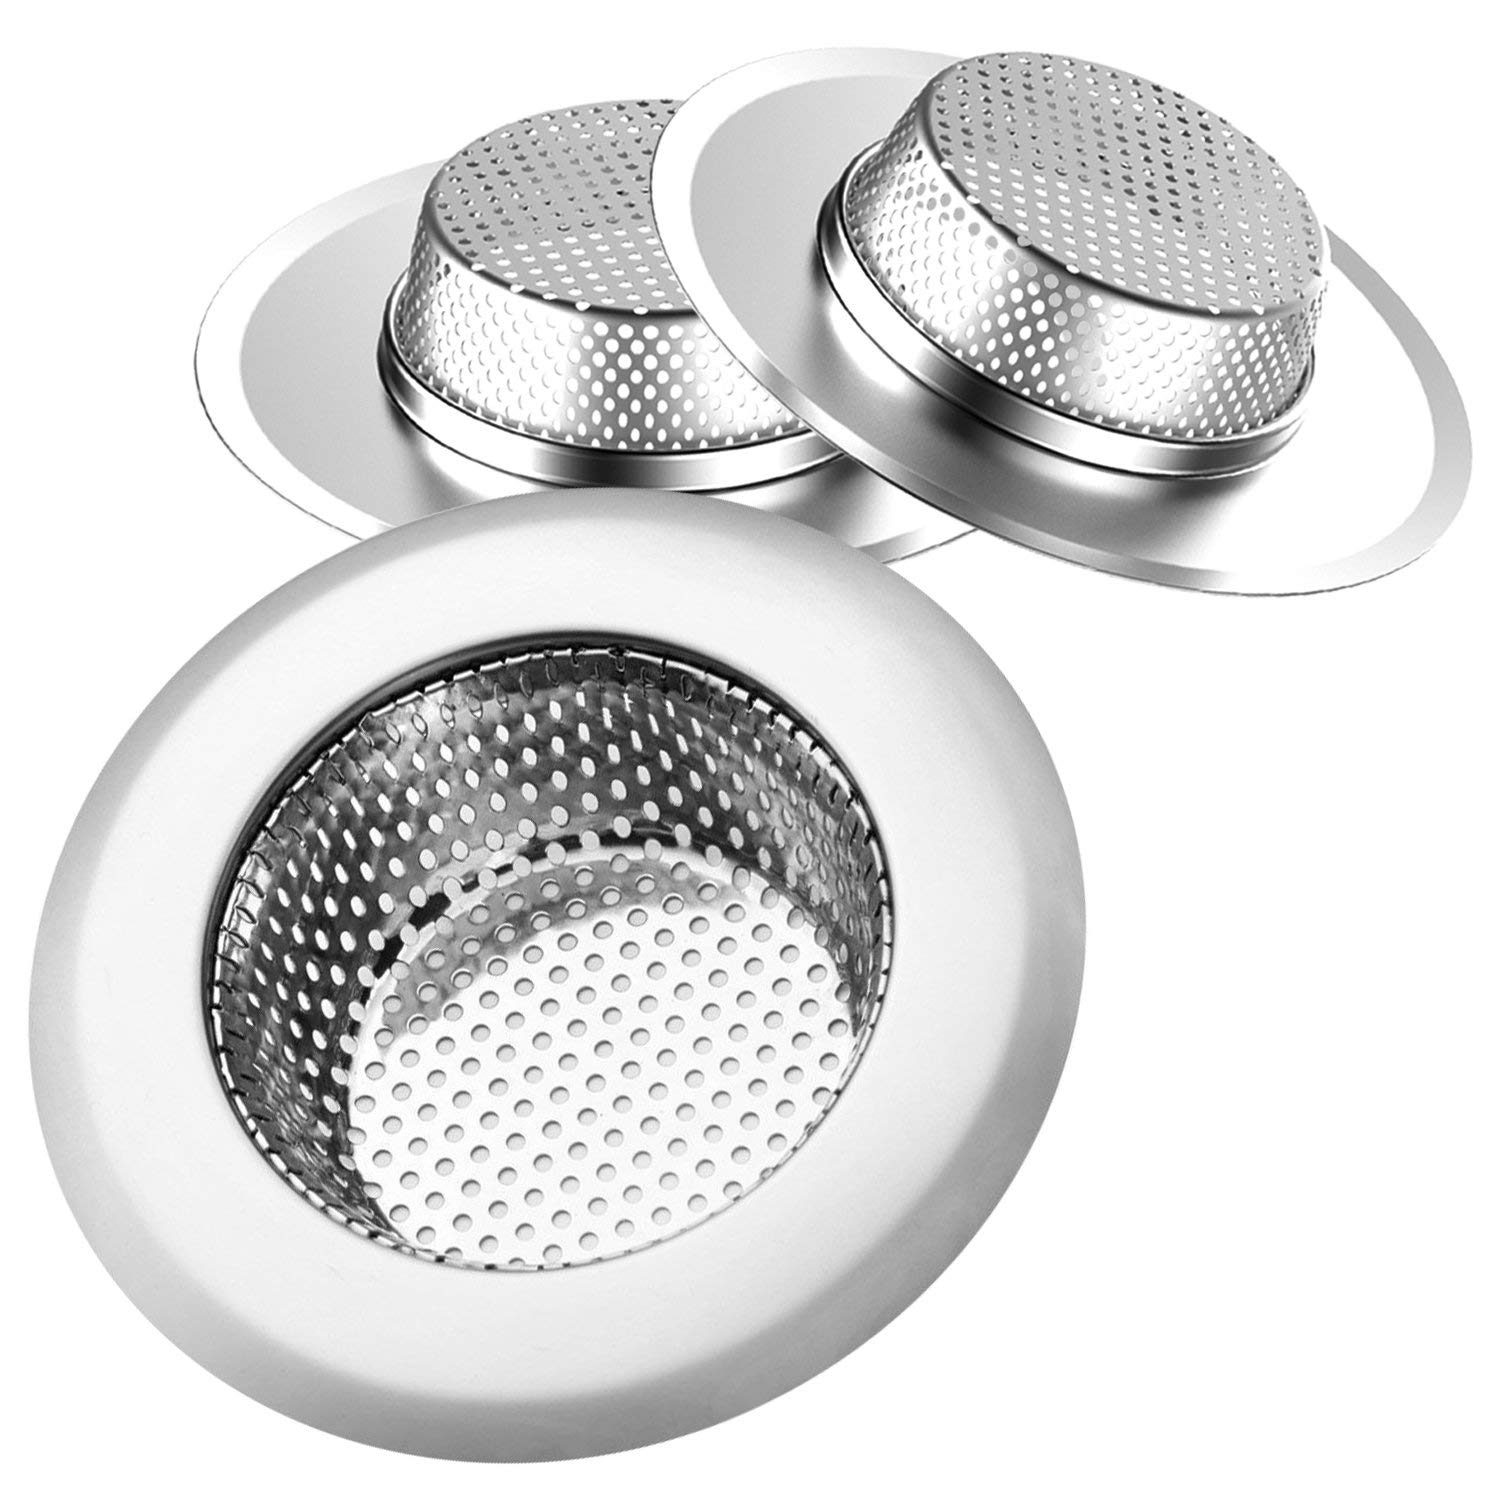 Helect Easy Clean Kitchen Sink Strainer Baskets, 3-Pack